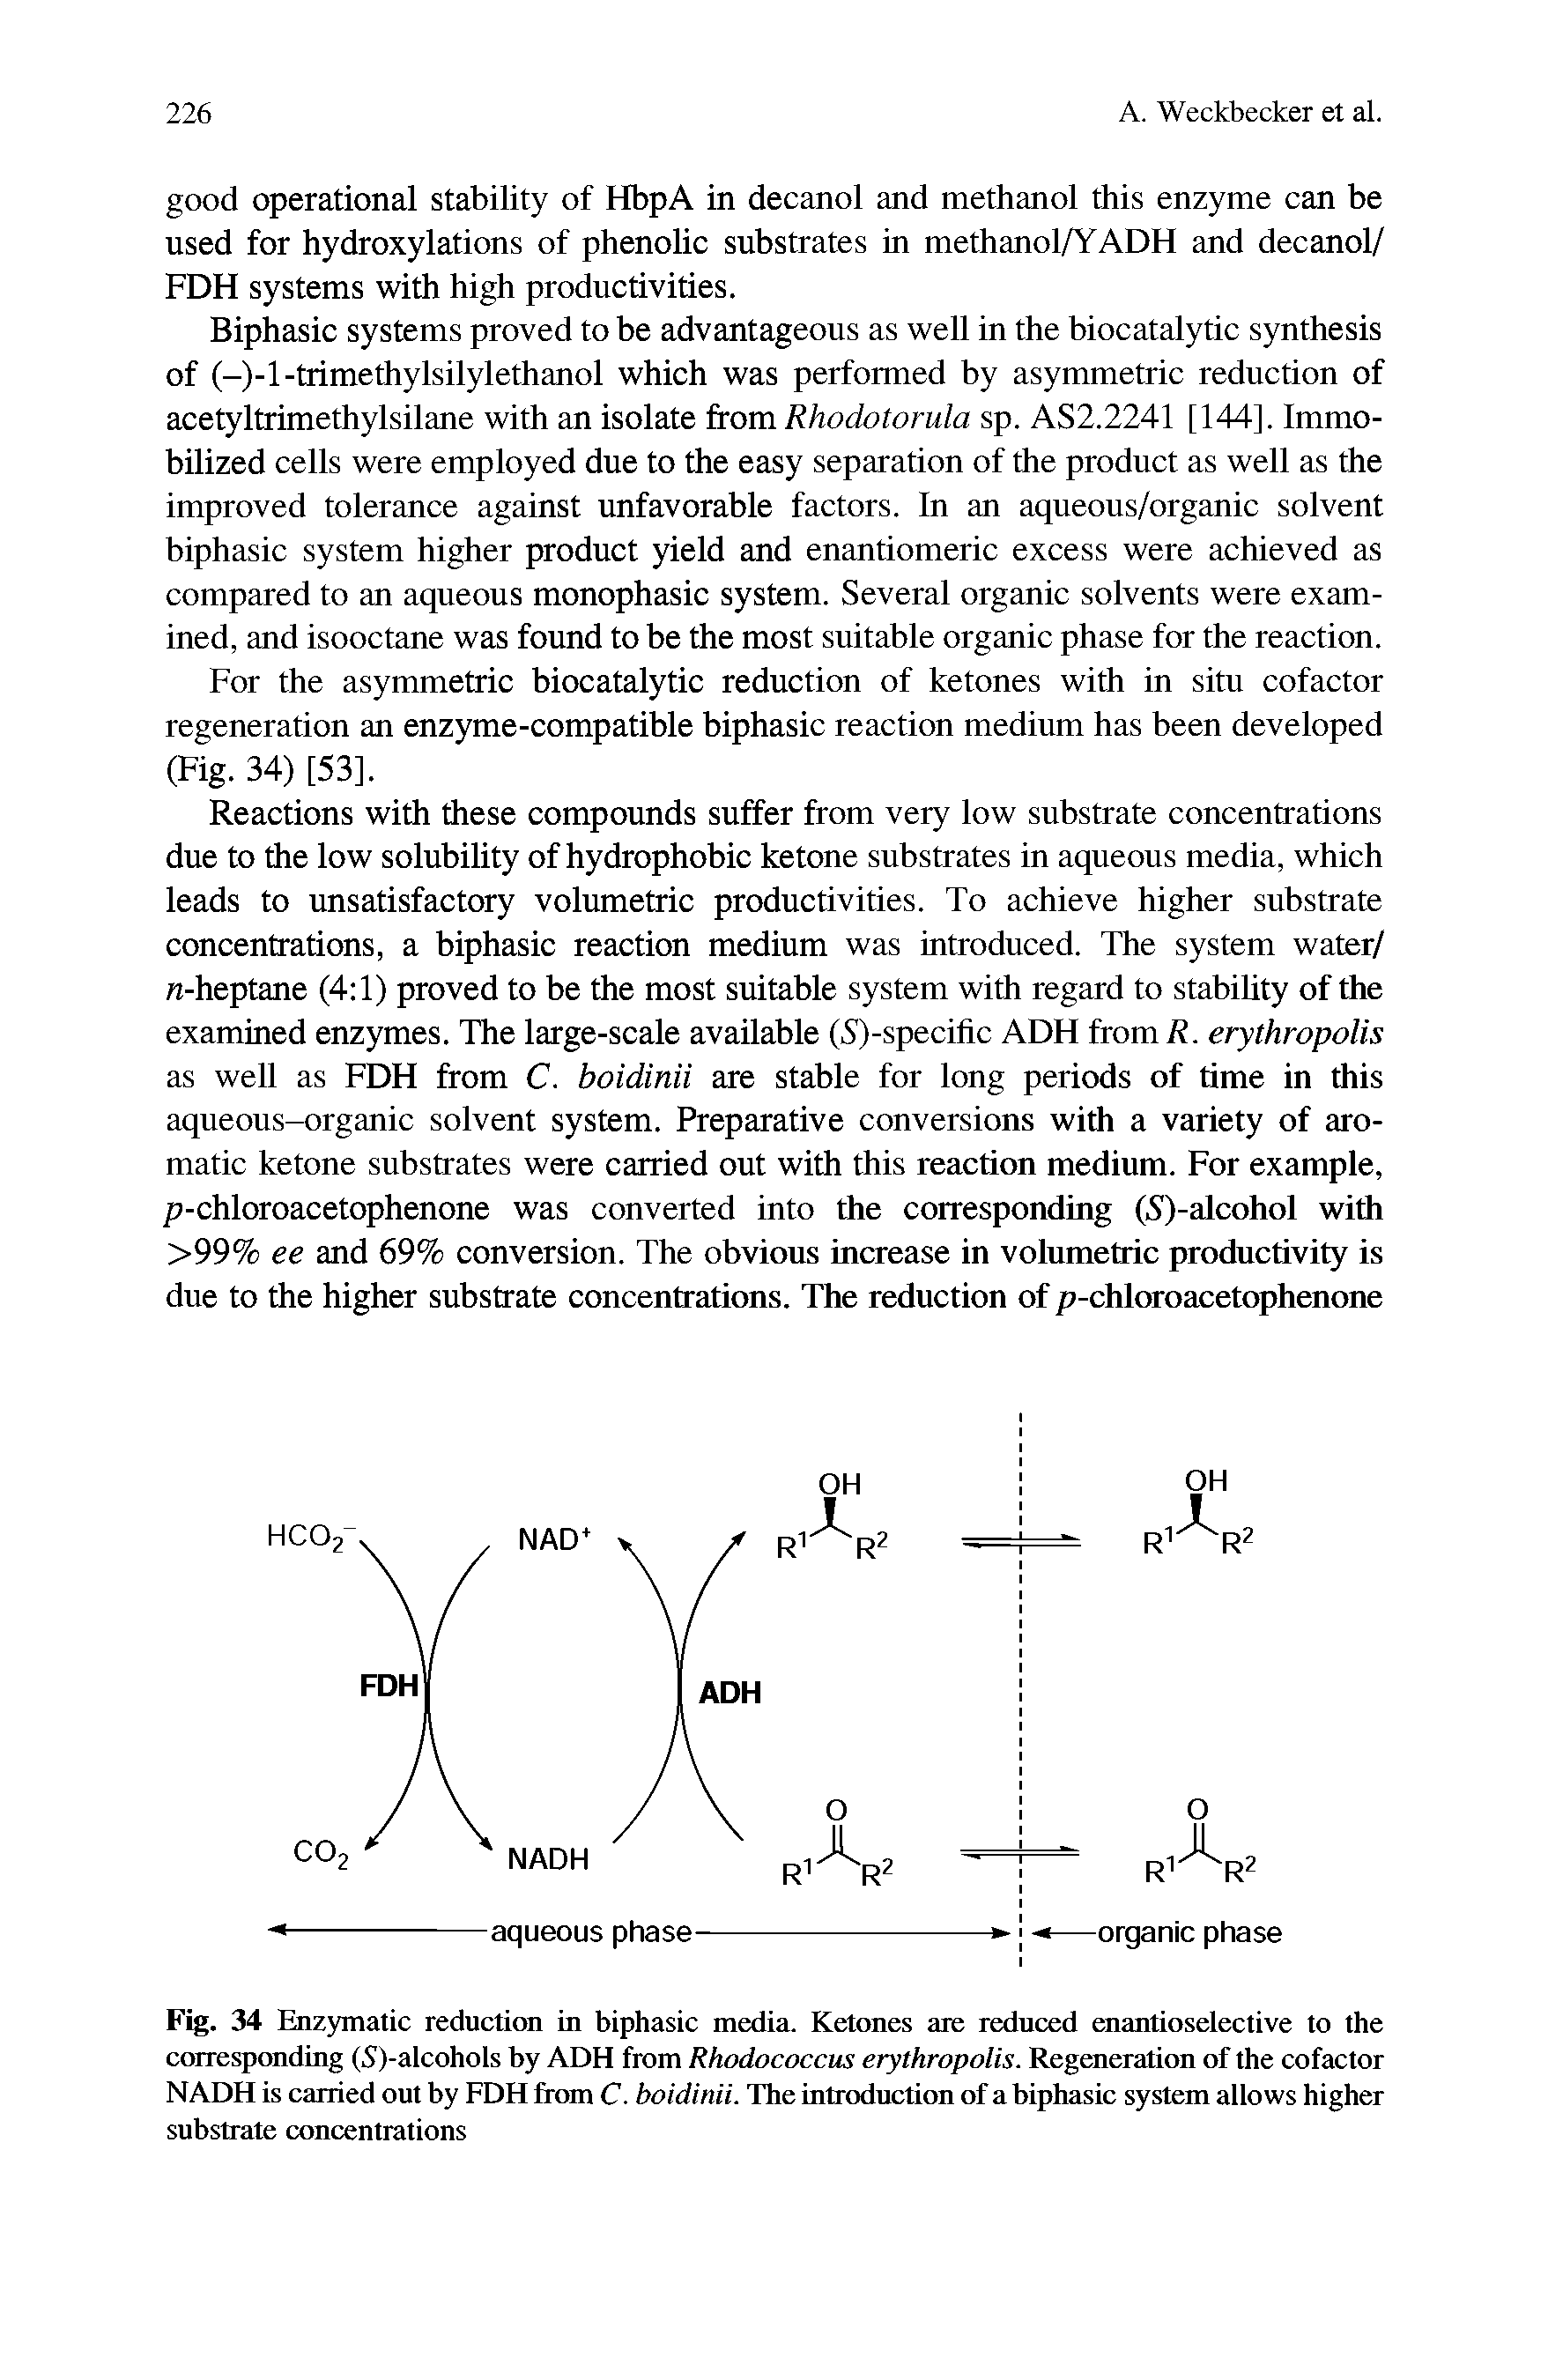 Fig. 34 Enzymatic reduction in biphasic media. Ketones are reduced enantioselective to the corresponding (S)-alcohols by ADH from Rhodococcus erythropolis. Regeneration of the cofactor NADH is carried out by FDH from C. boidinii. The introduction of a biphasic system allows higher substrate concentrations...